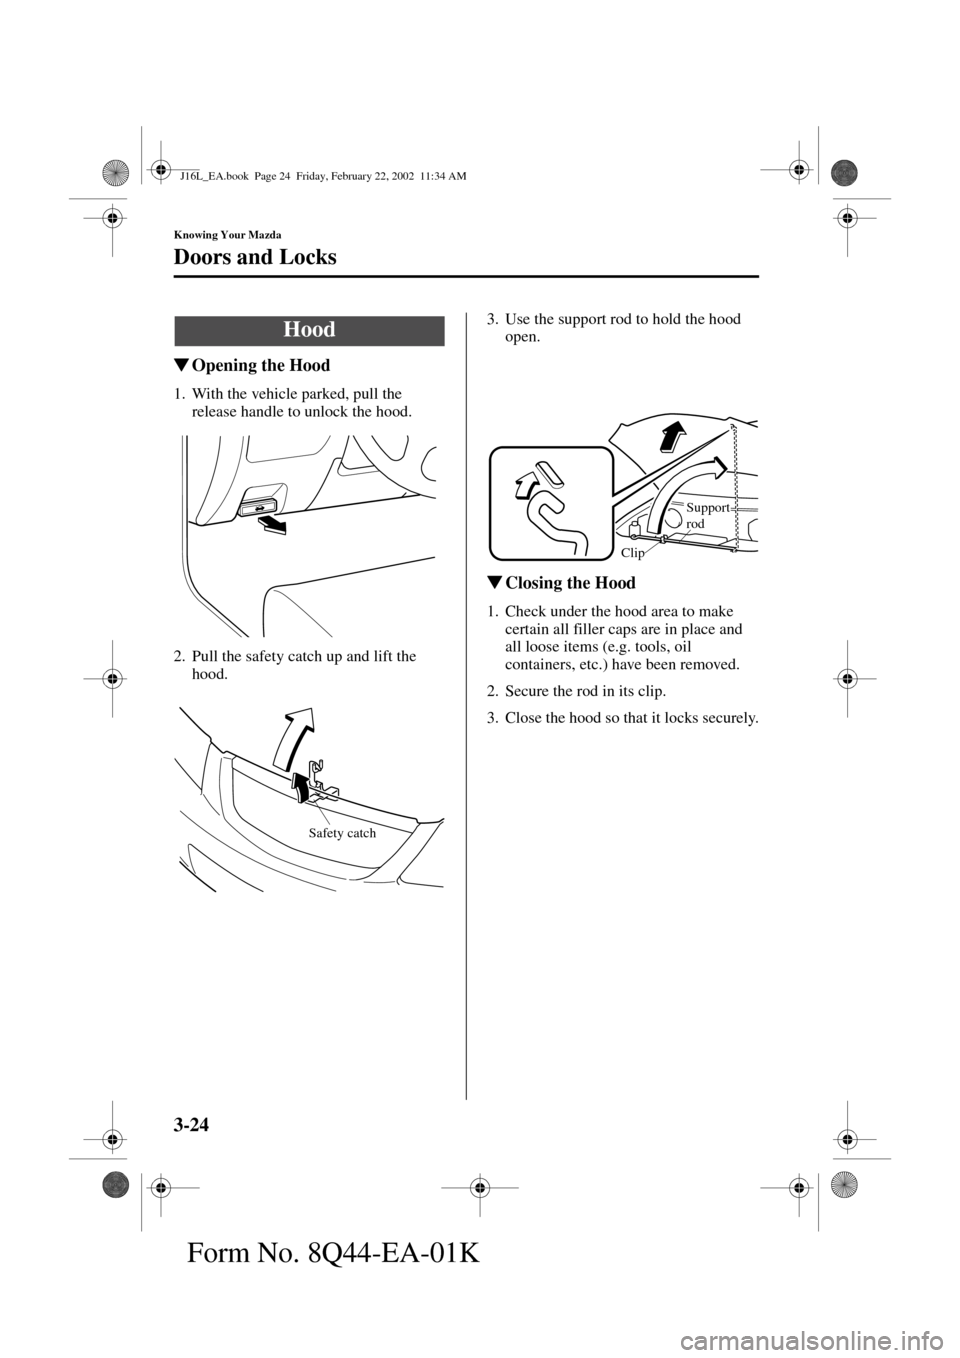 MAZDA MODEL MPV 2002  Owners Manual (in English) 3-24
Knowing Your Mazda
Doors and Locks
Form No. 8Q44-EA-01K
Opening the Hood
1. With the vehicle parked, pull the 
release handle to unlock the hood.
2. Pull the safety catch up and lift the 
hood.3